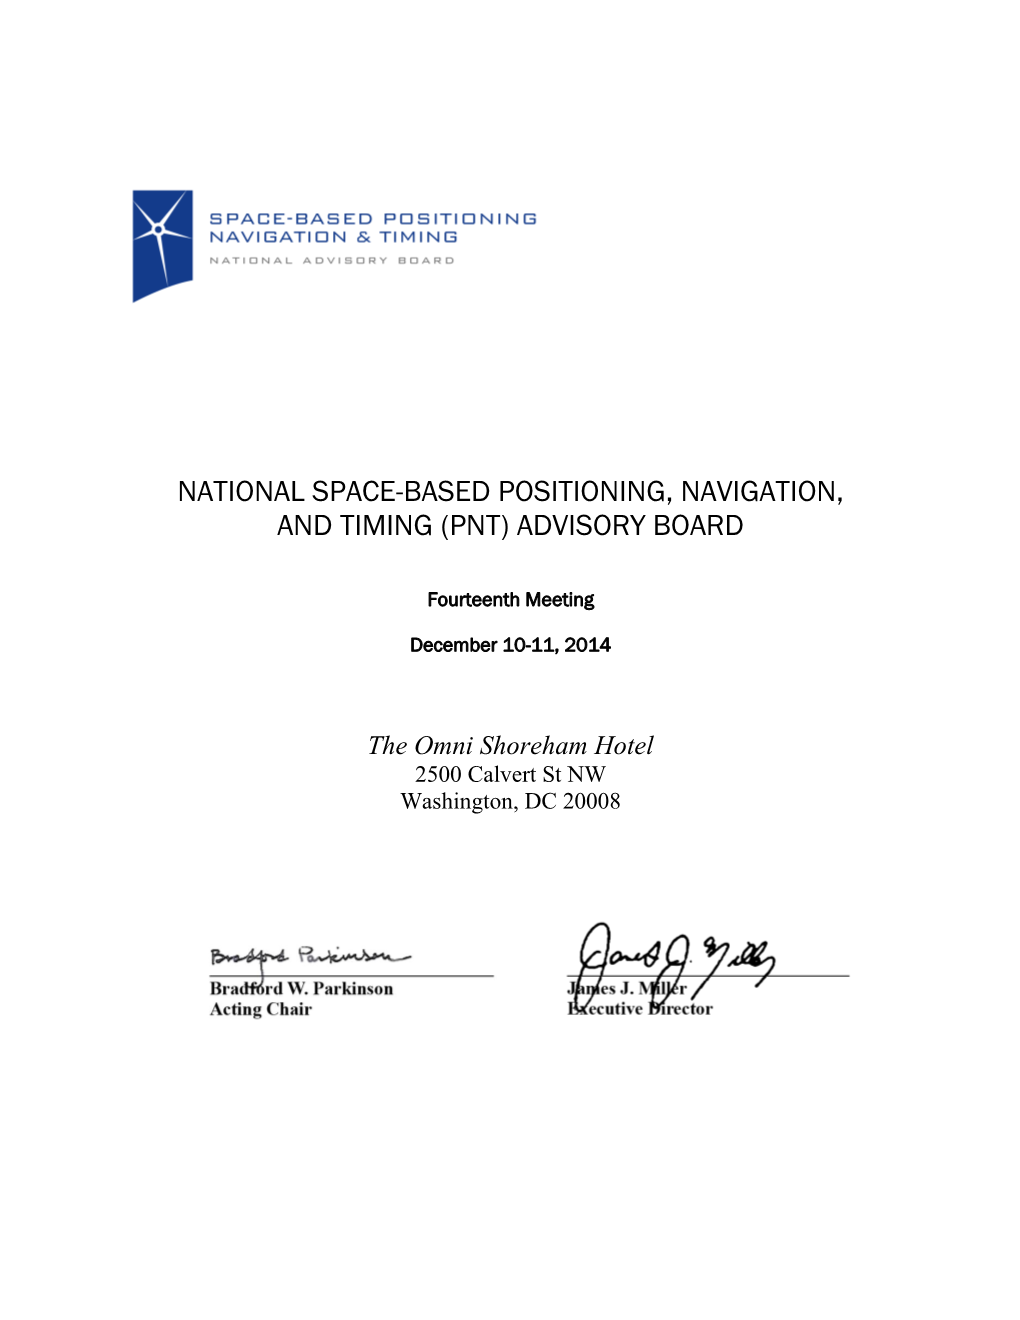 National Space-Based Positioning, Navigation, and Timing Advisory